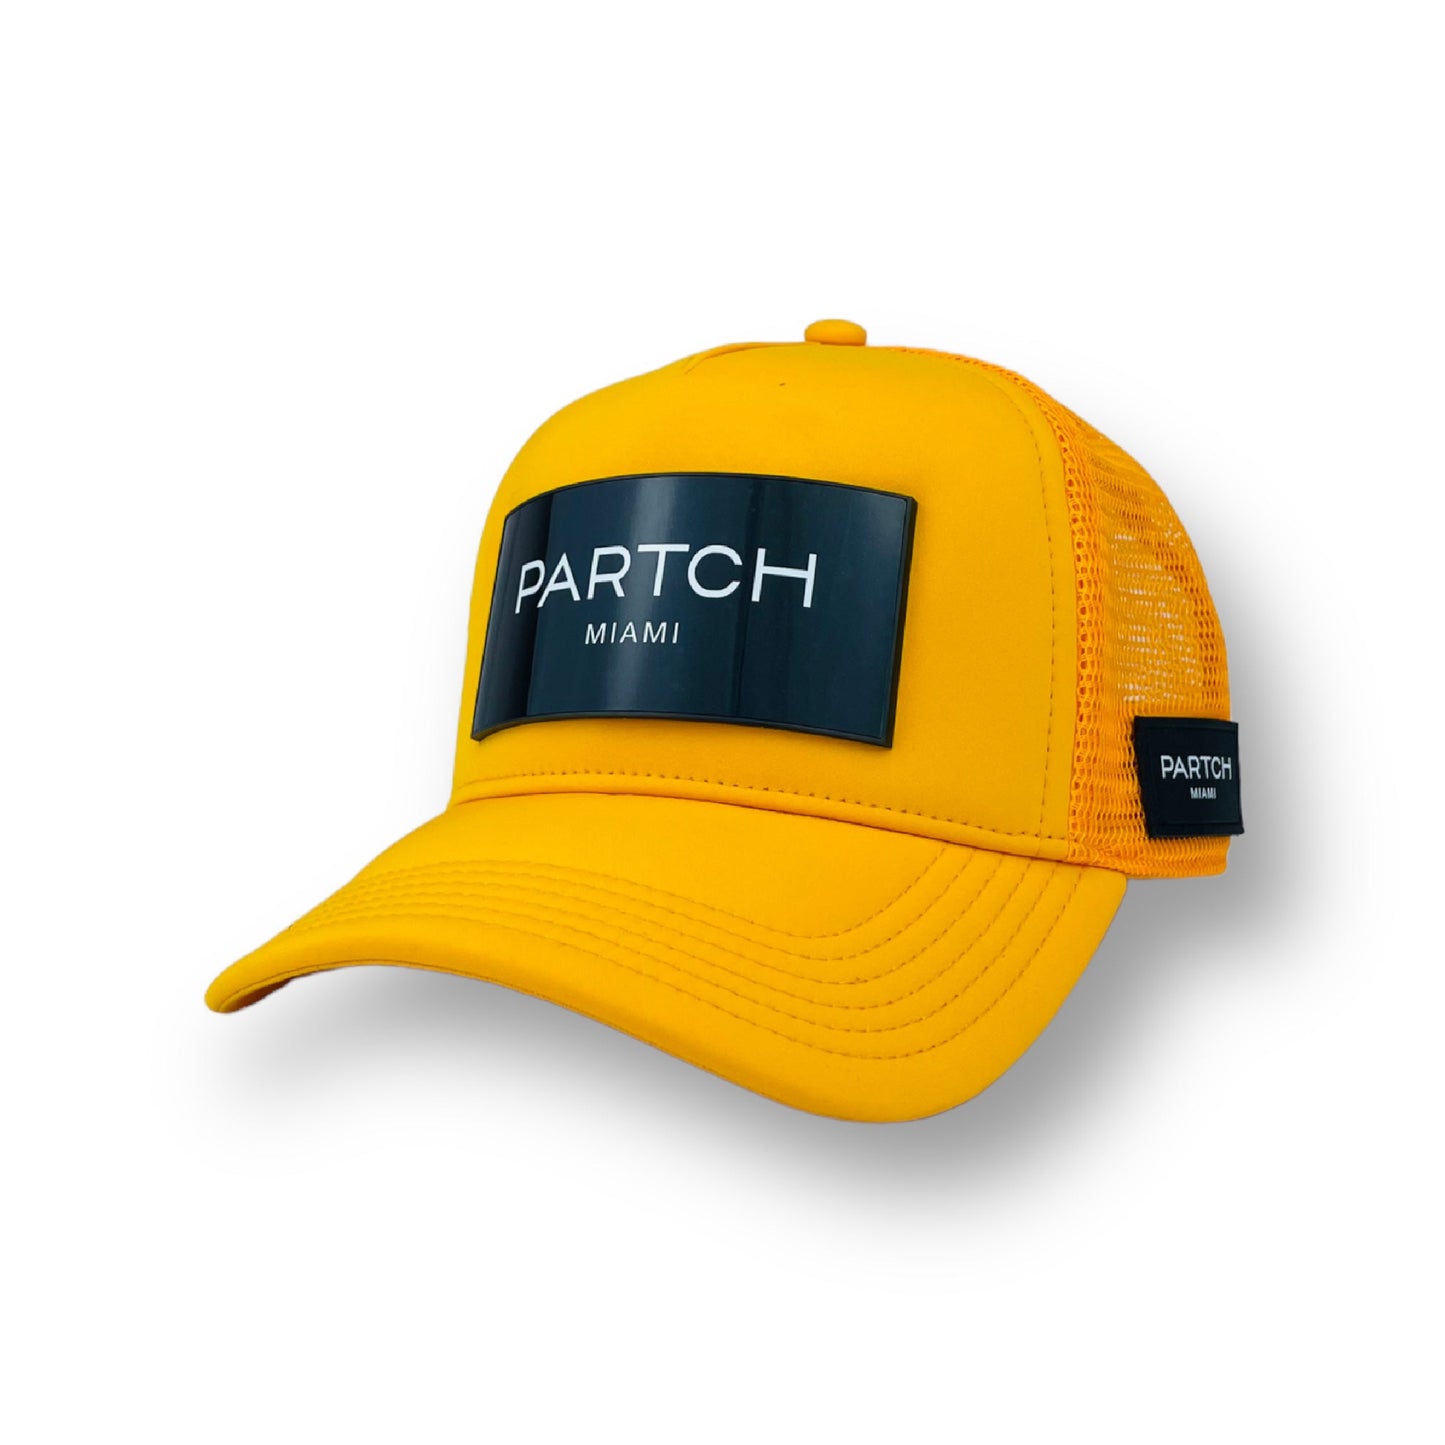 Logomania Partch trucker hat in yellow | PARTCH-Clip removable